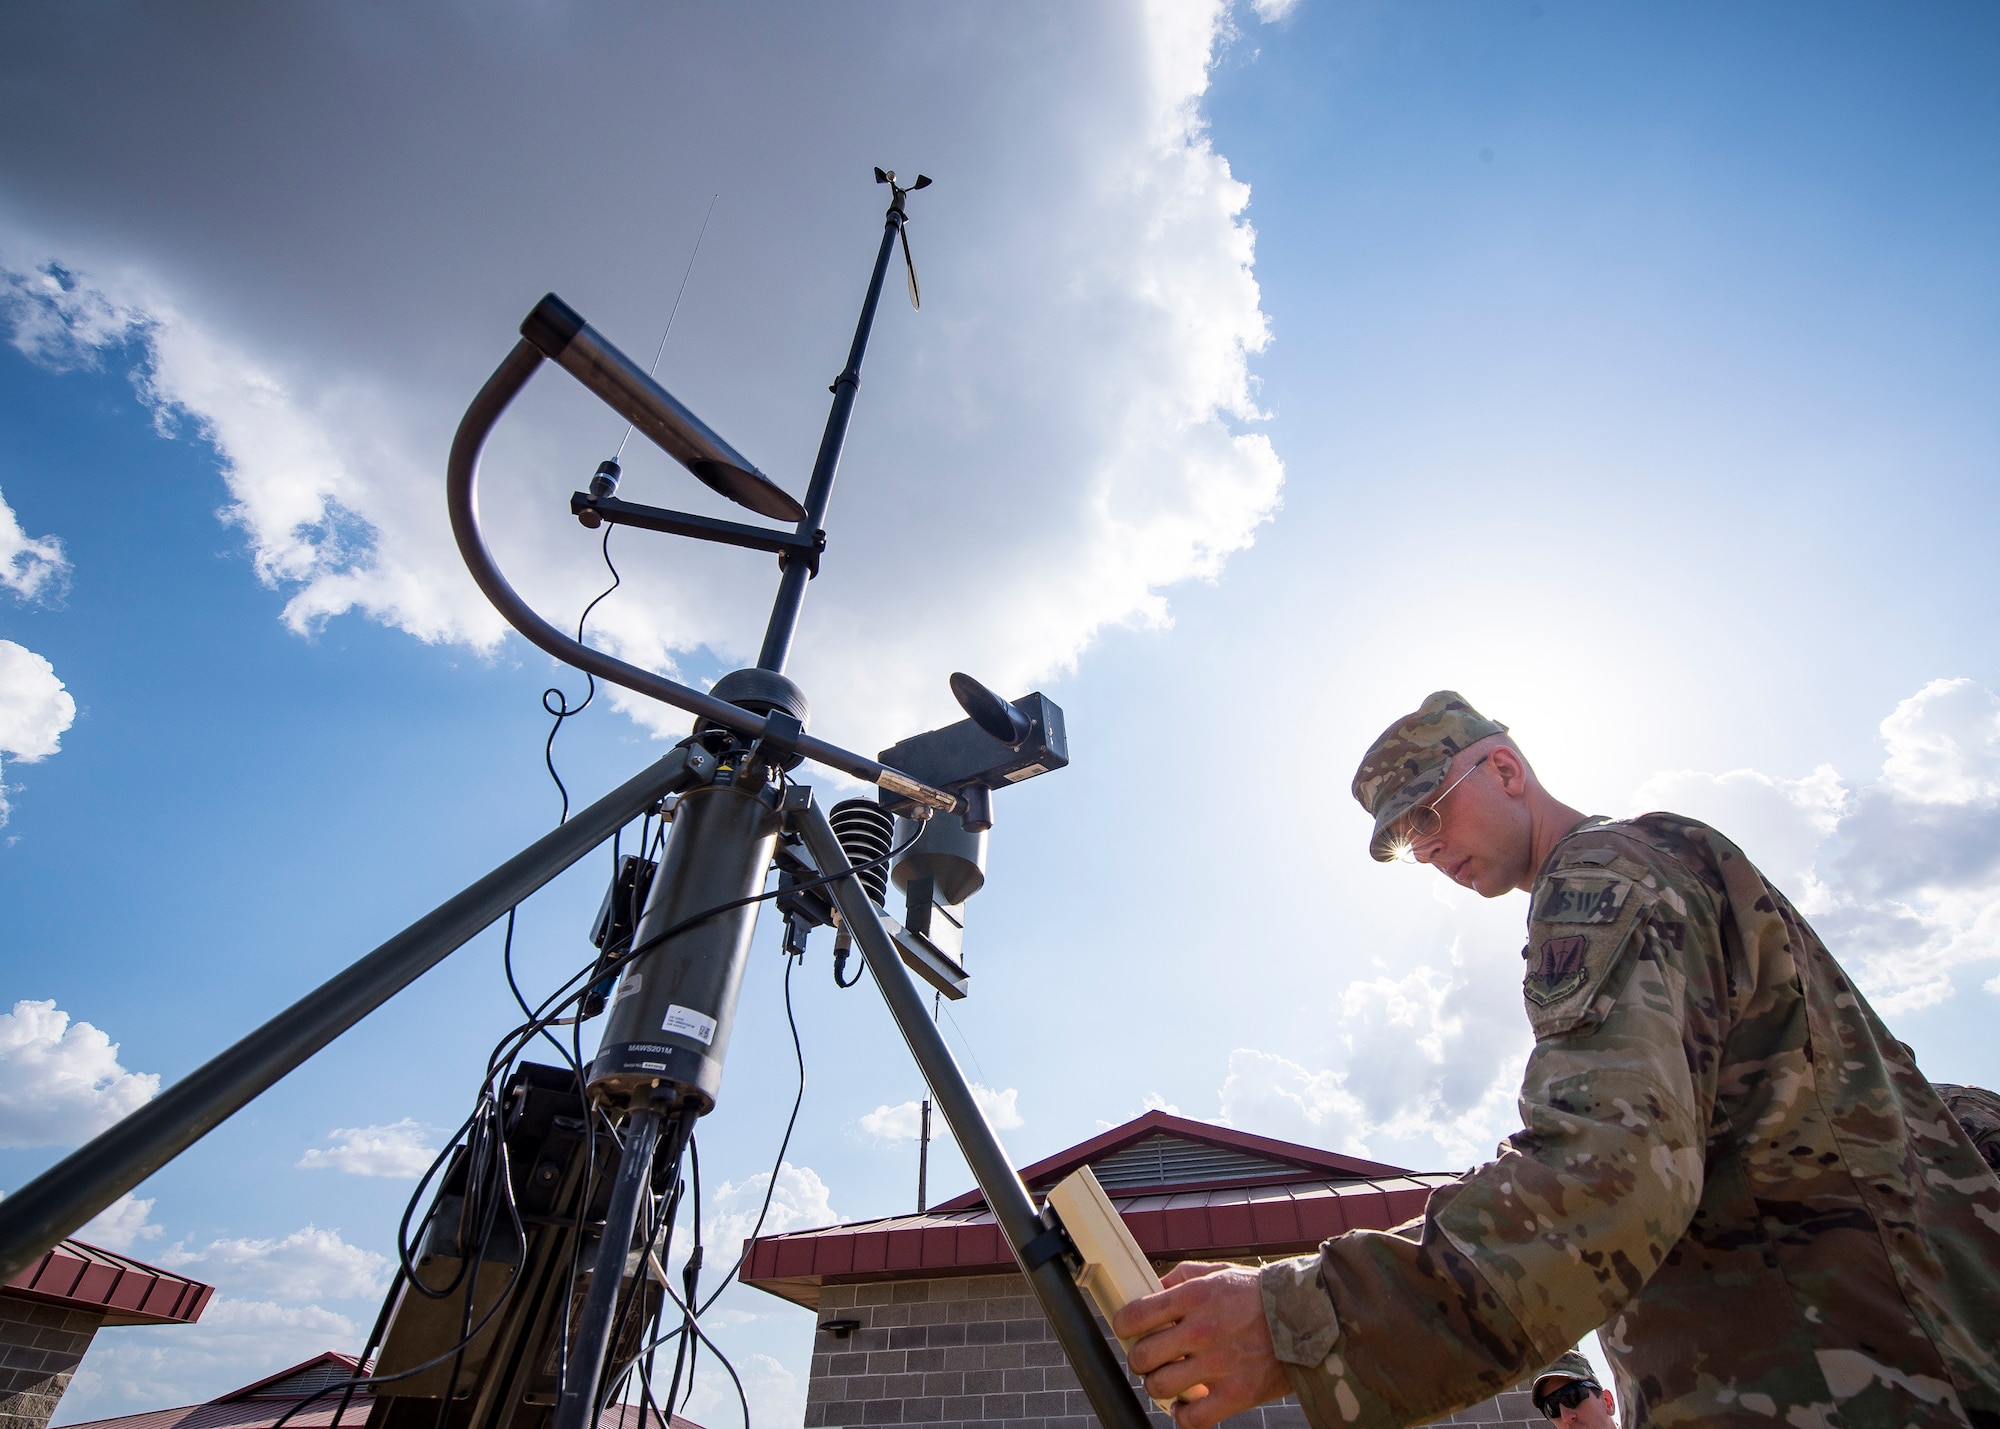 A Staff Weather Officer from the 3d Weather Squadron (WS) operates a tactical meteorological observing system during a certification field exercise (CFX), July 31, 2019, at Camp Bowie Training Center, Texas. The CFX was designed to evaluate the squadron’s overall tactical ability and readiness to provide the U.S. Army with full spectrum environmental support to the Joint Task Force (JTF) fight. While deployed, the Army relies on the 3d WS to provide them with current ground weather reports. These reports are then employed by commanders on the ground as they plan the best tactics and approaches to accomplish the mission. (U.S. Air Force photo by Airman 1st Class Eugene Oliver)